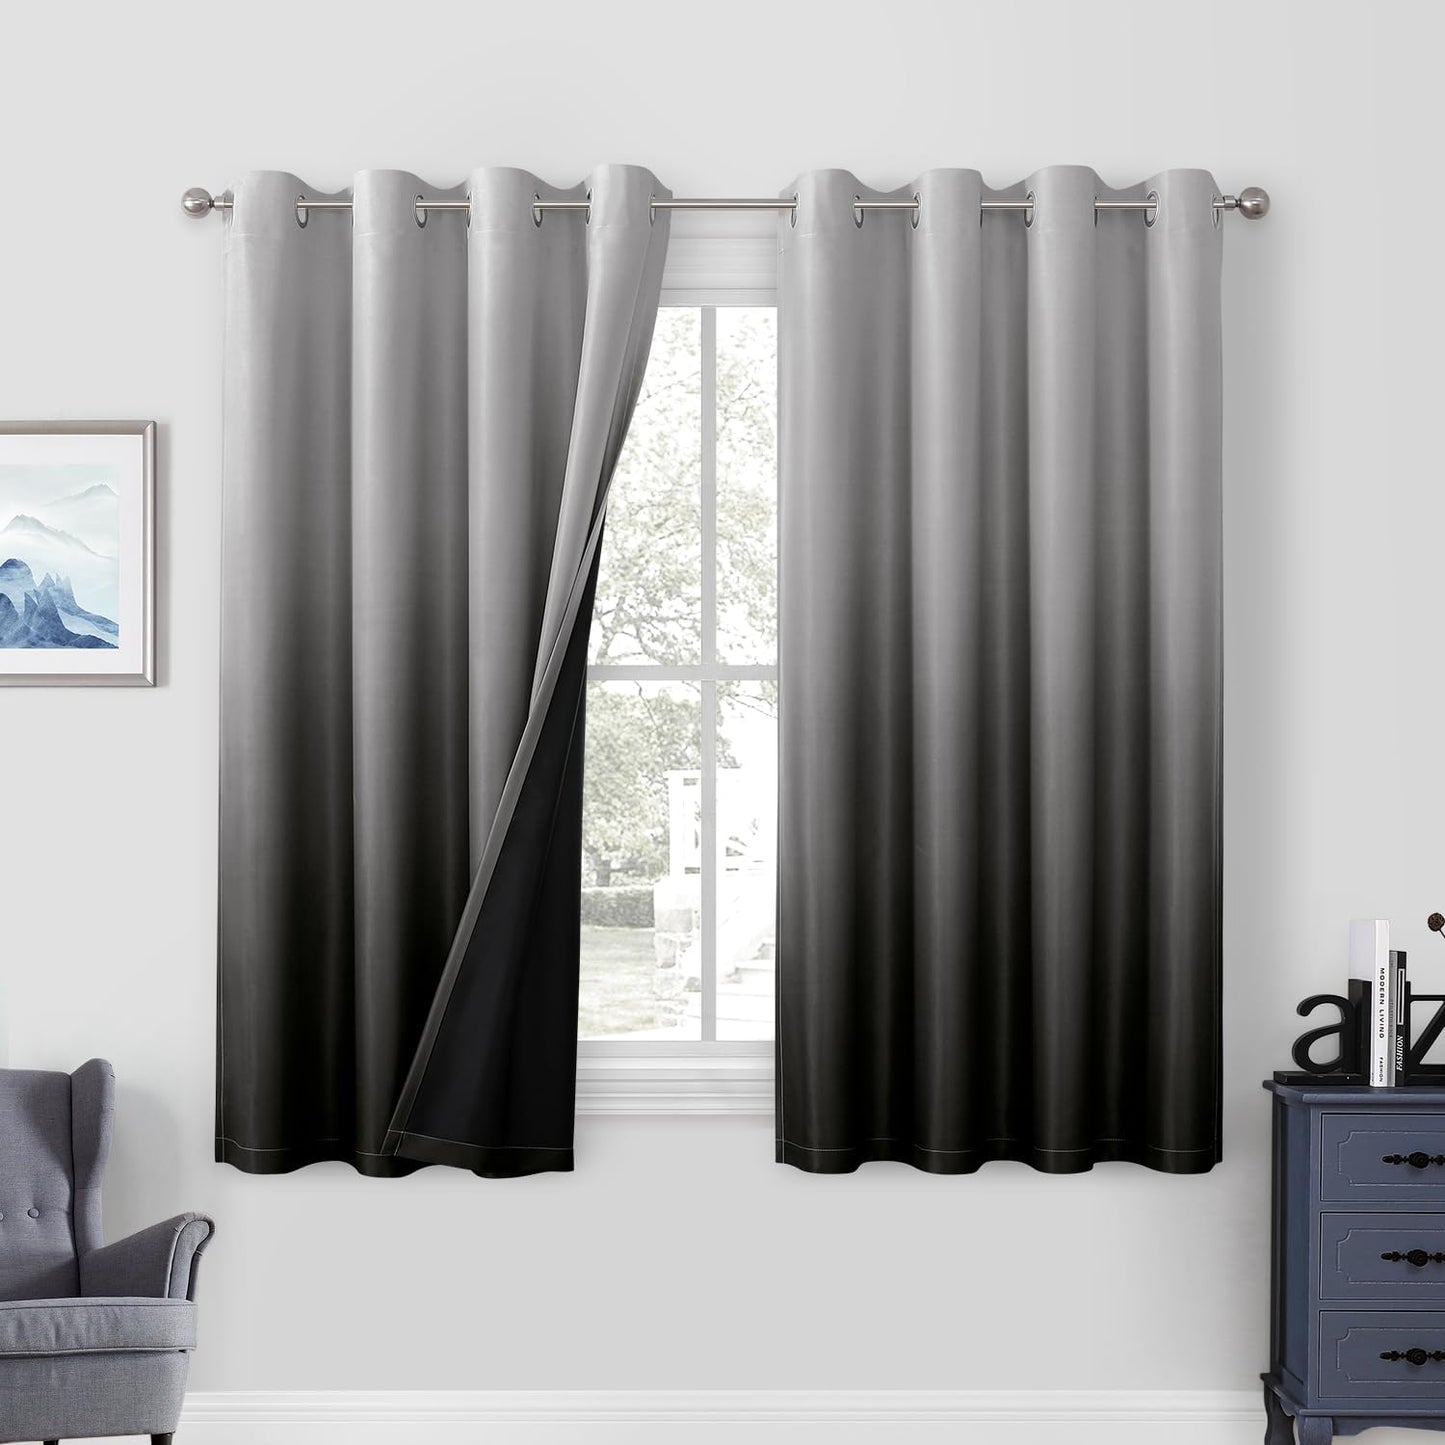 HOMEIDEAS 100% Black Ombre Blackout Curtains for Bedroom, Room Darkening Curtains 52 X 84 Inches Long Grommet Gradient Drapes, Light Blocking Thermal Insulated Curtains for Living Room, 2 Panels  HOMEIDEAS Black 2 Panel-52" X 63" 